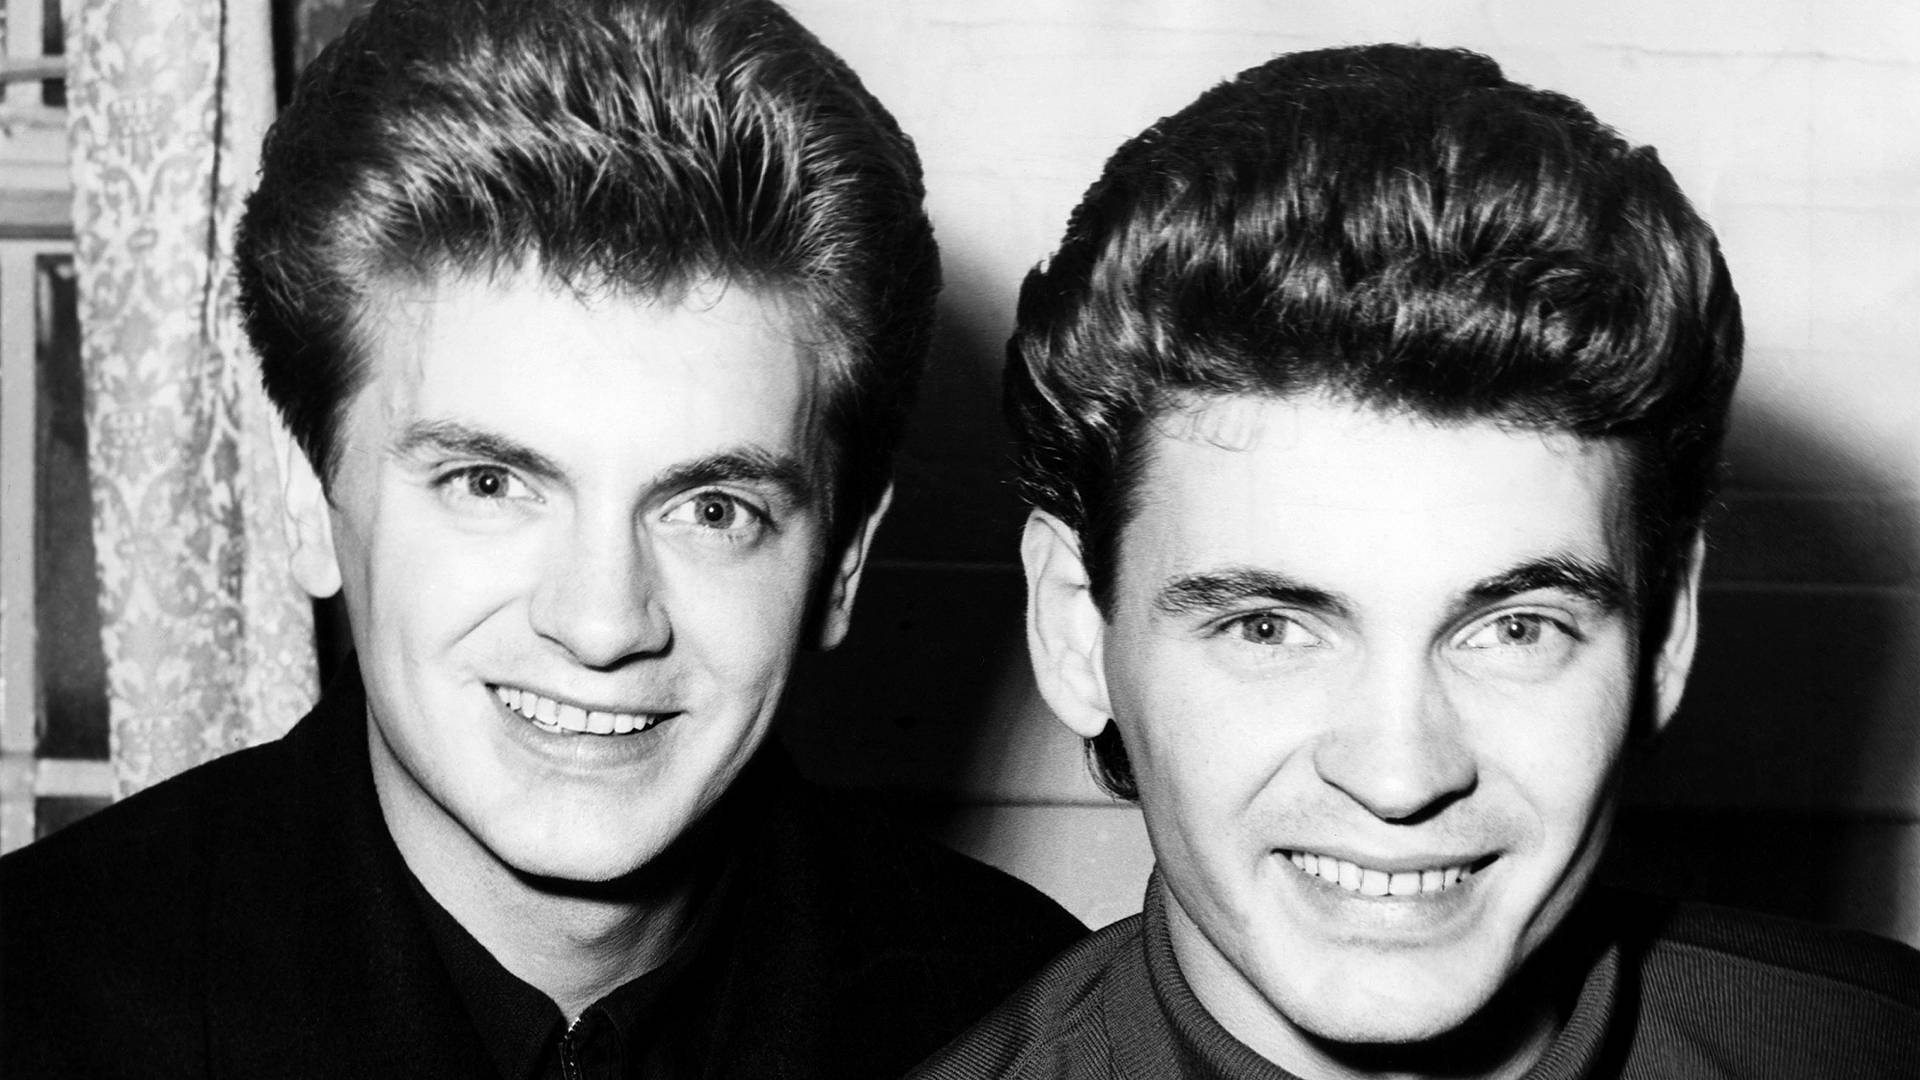 Iconic Everly Brothers - Phil and Don in a Classic Head-shot Wallpaper